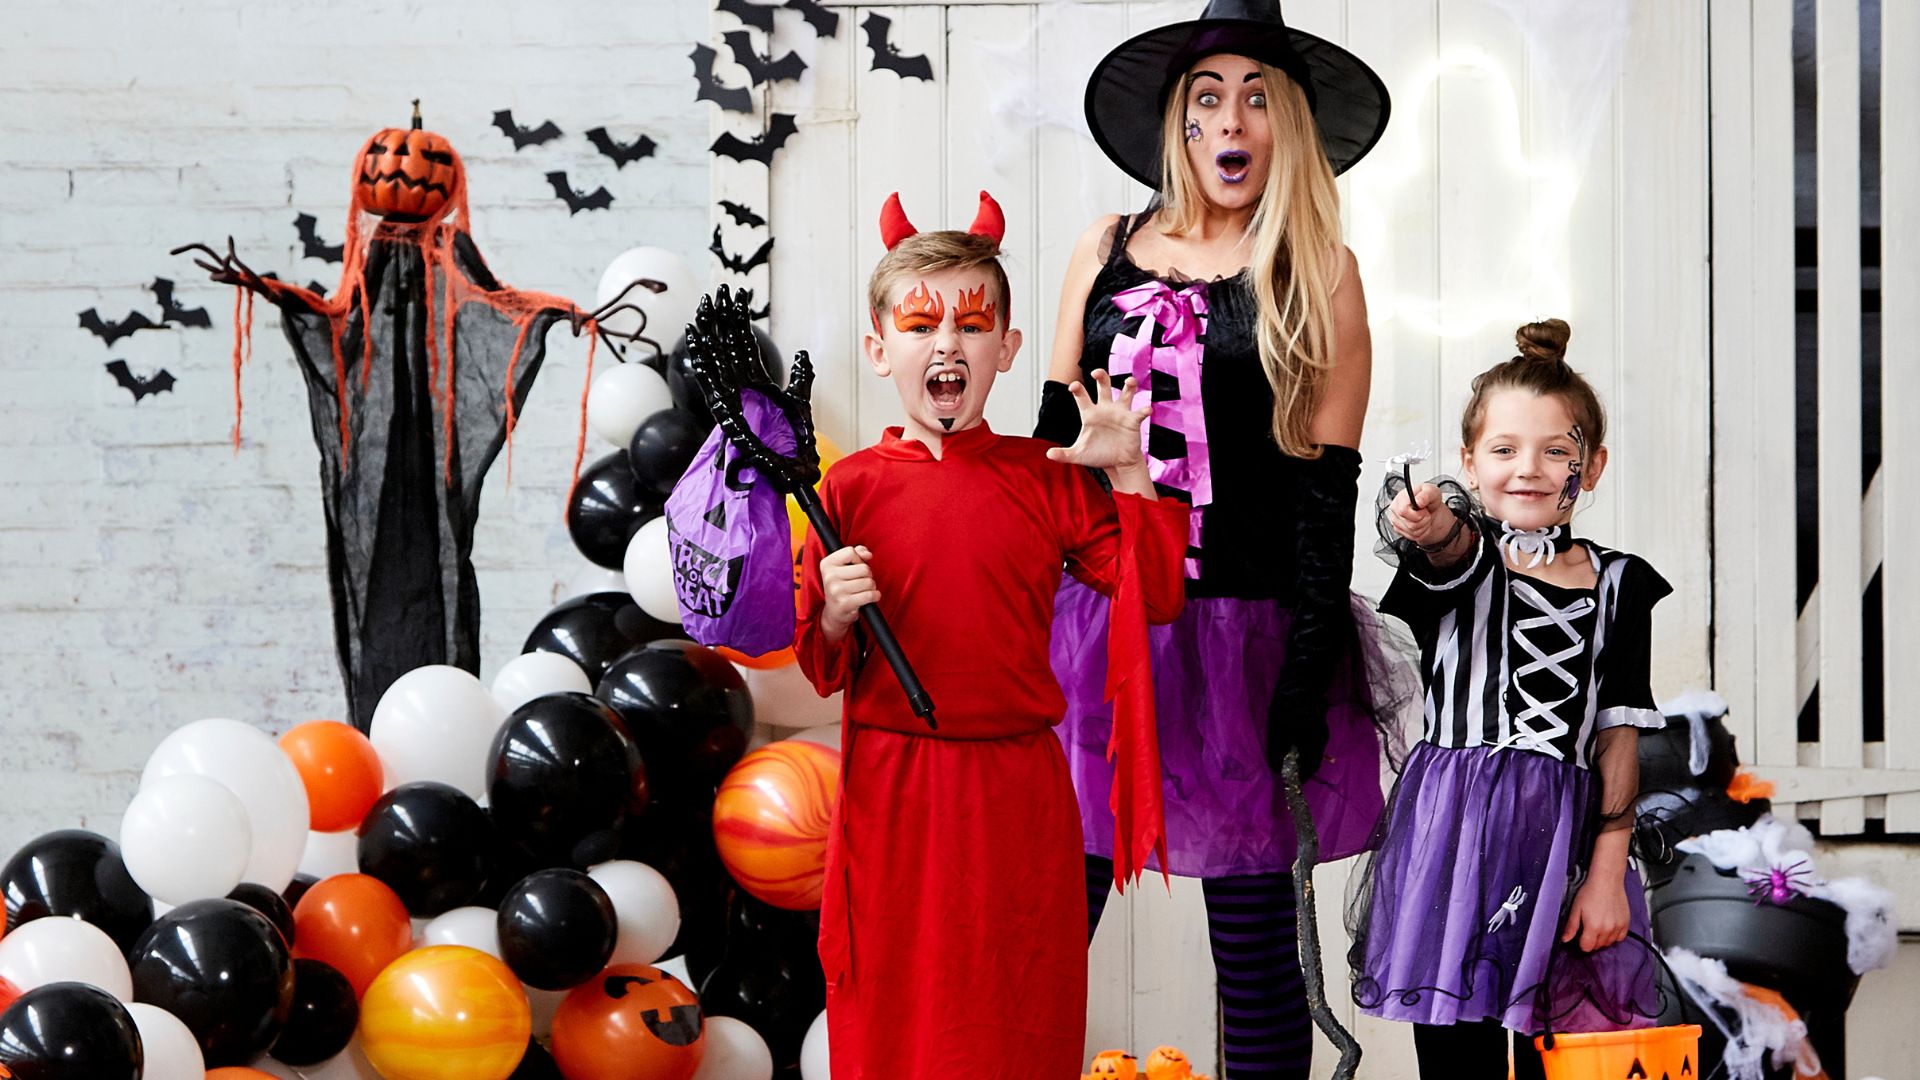 Dress up in spooky Halloween costumes for a trick-or-treating walk